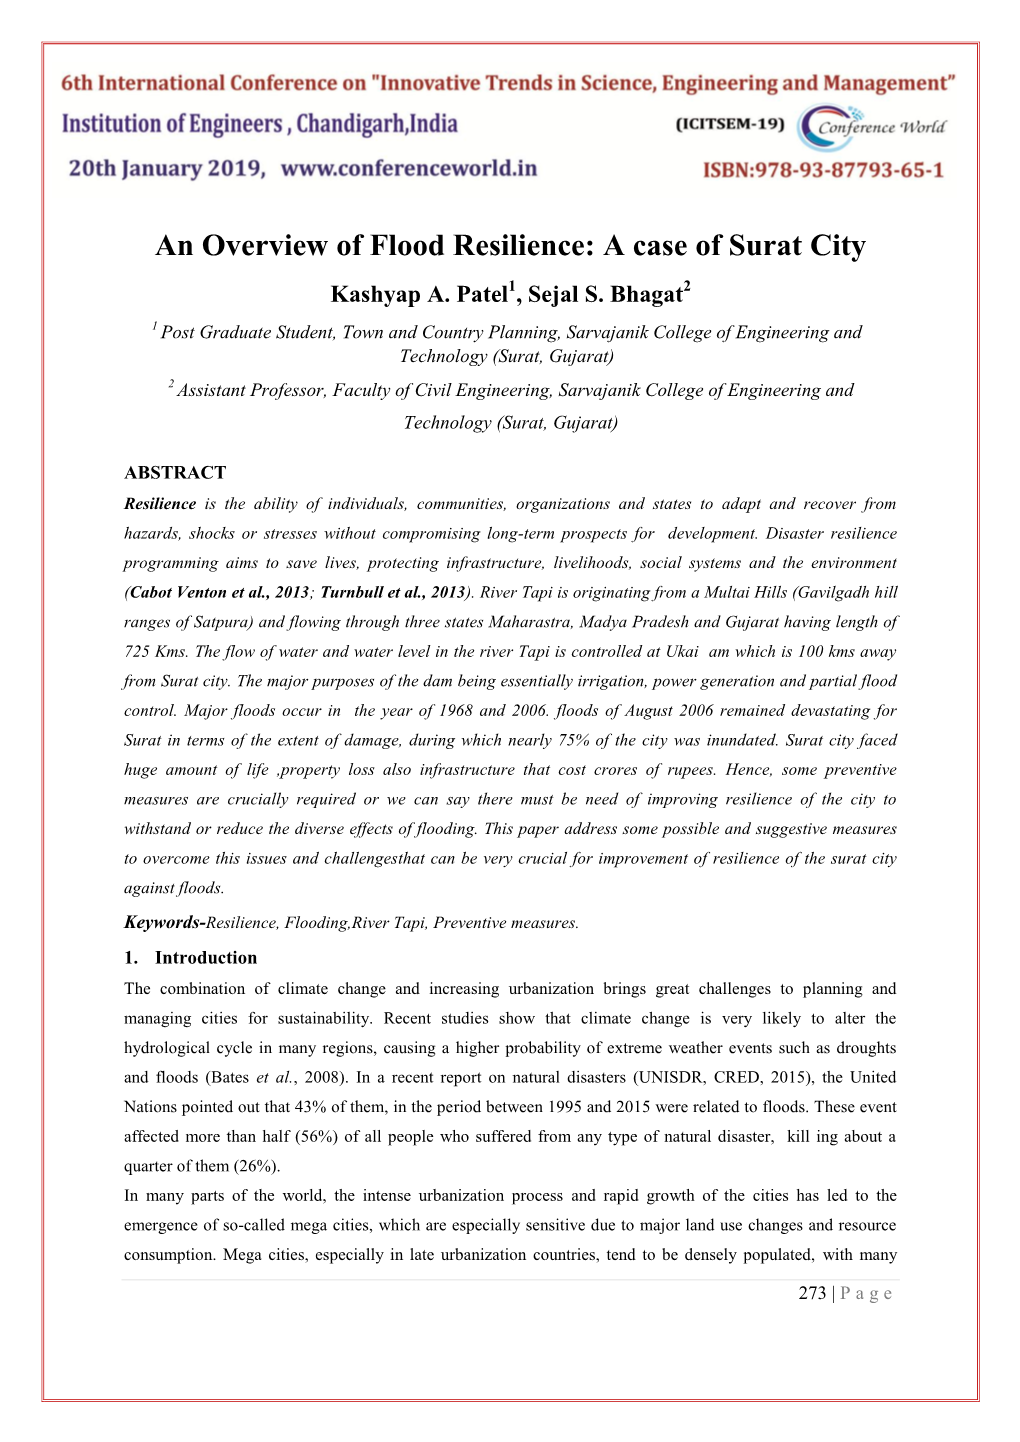 An Overview of Flood Resilience: a Case of Surat City Kashyap A